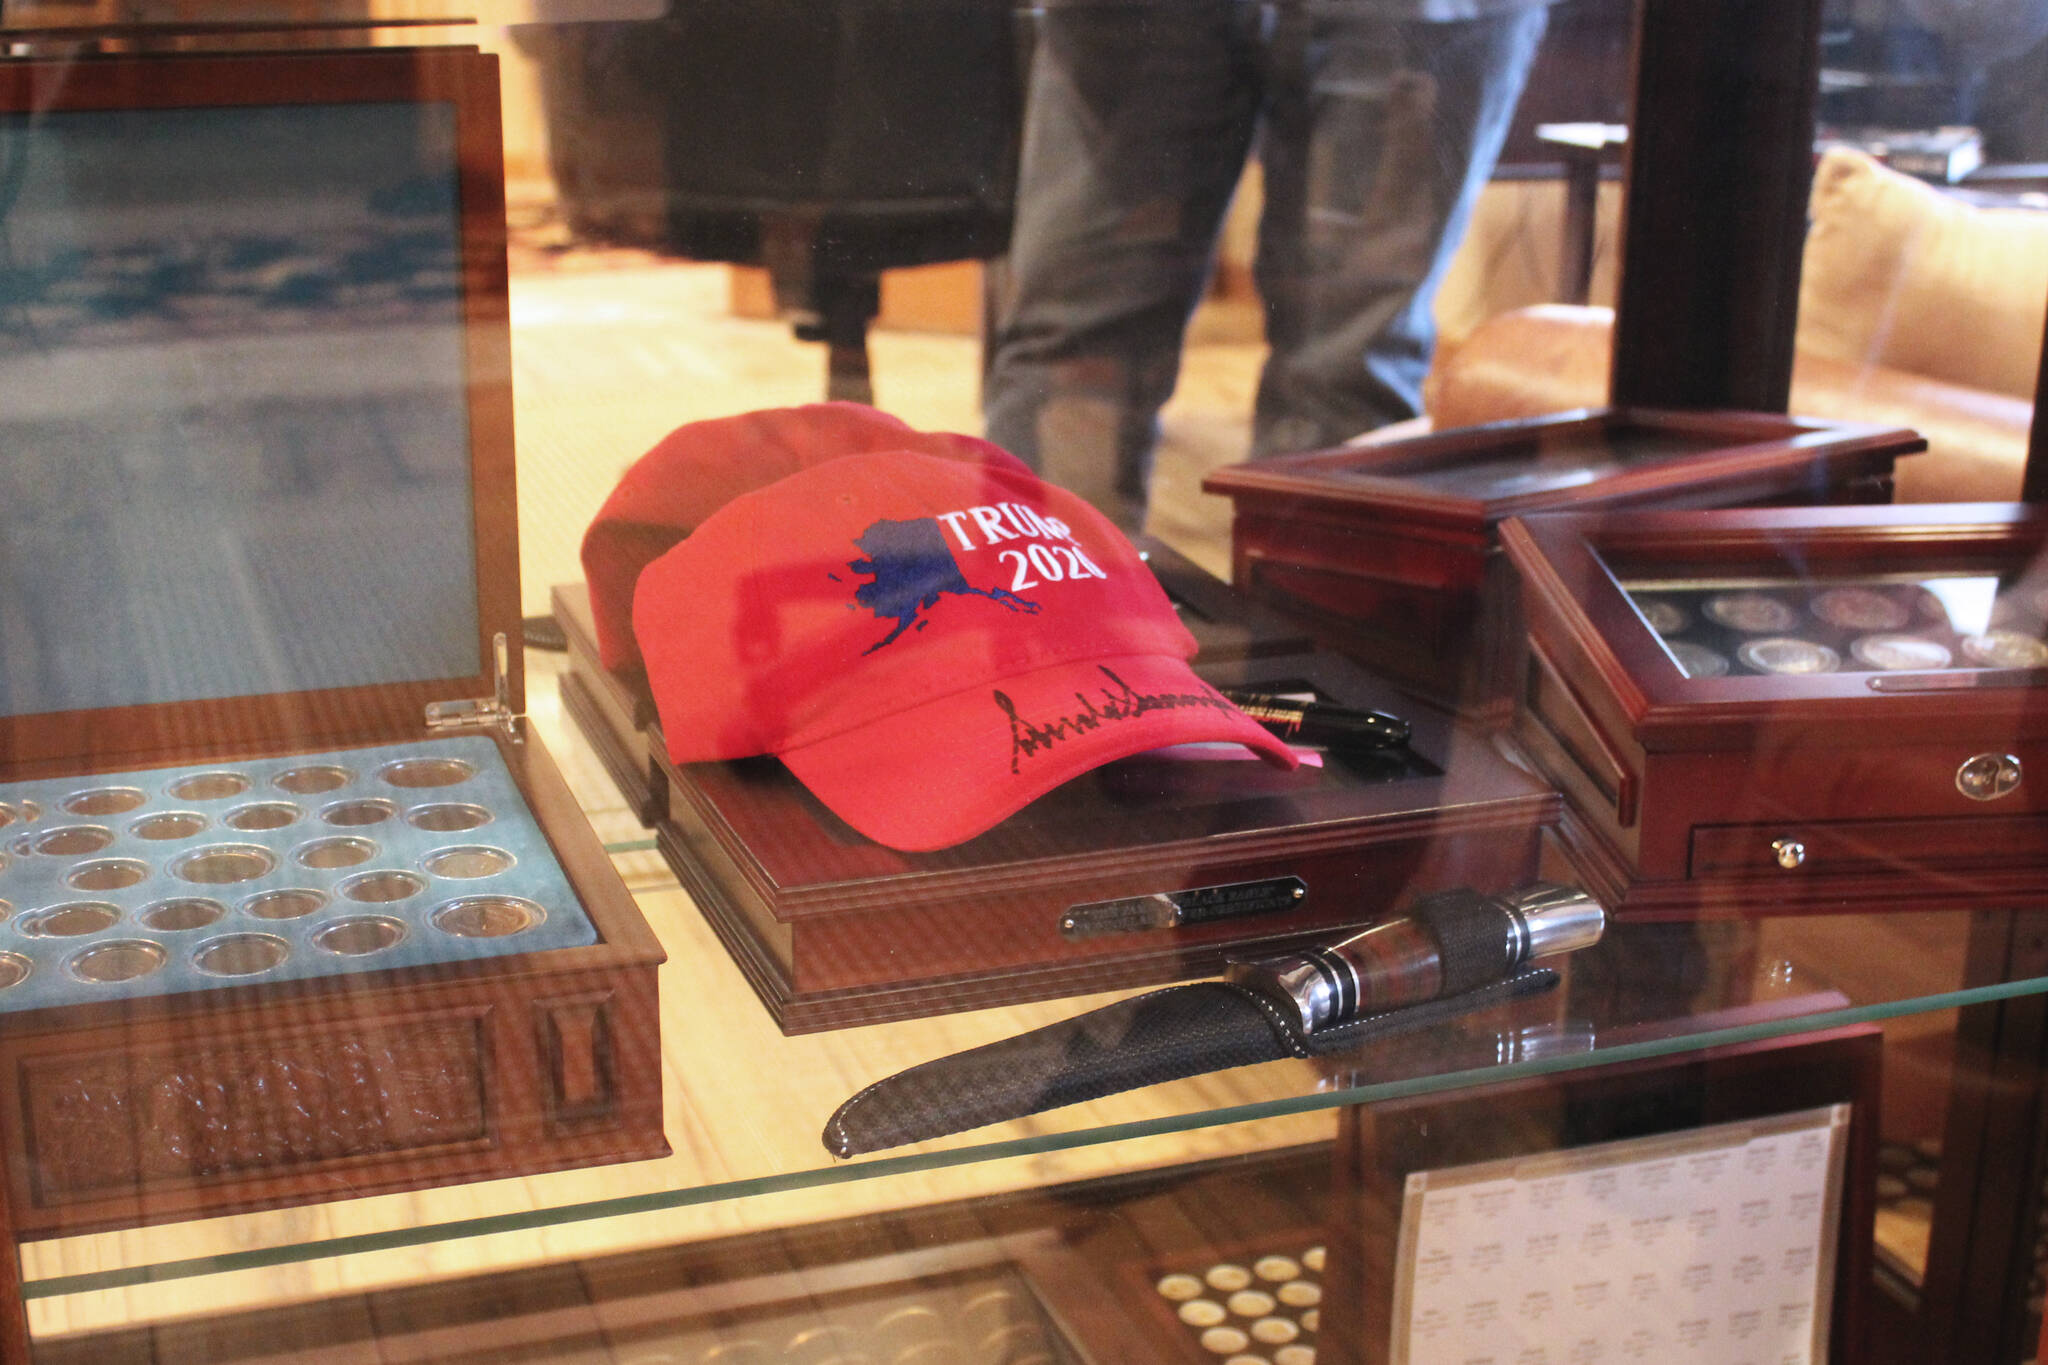 A hat signed by former U.S. President Donald Trump is displayed in Charlie Pierce’s home office on Thursday, March 10, 2022 in Sterling, Alaska. (Ashlyn O’Hara/Peninsula Clarion)